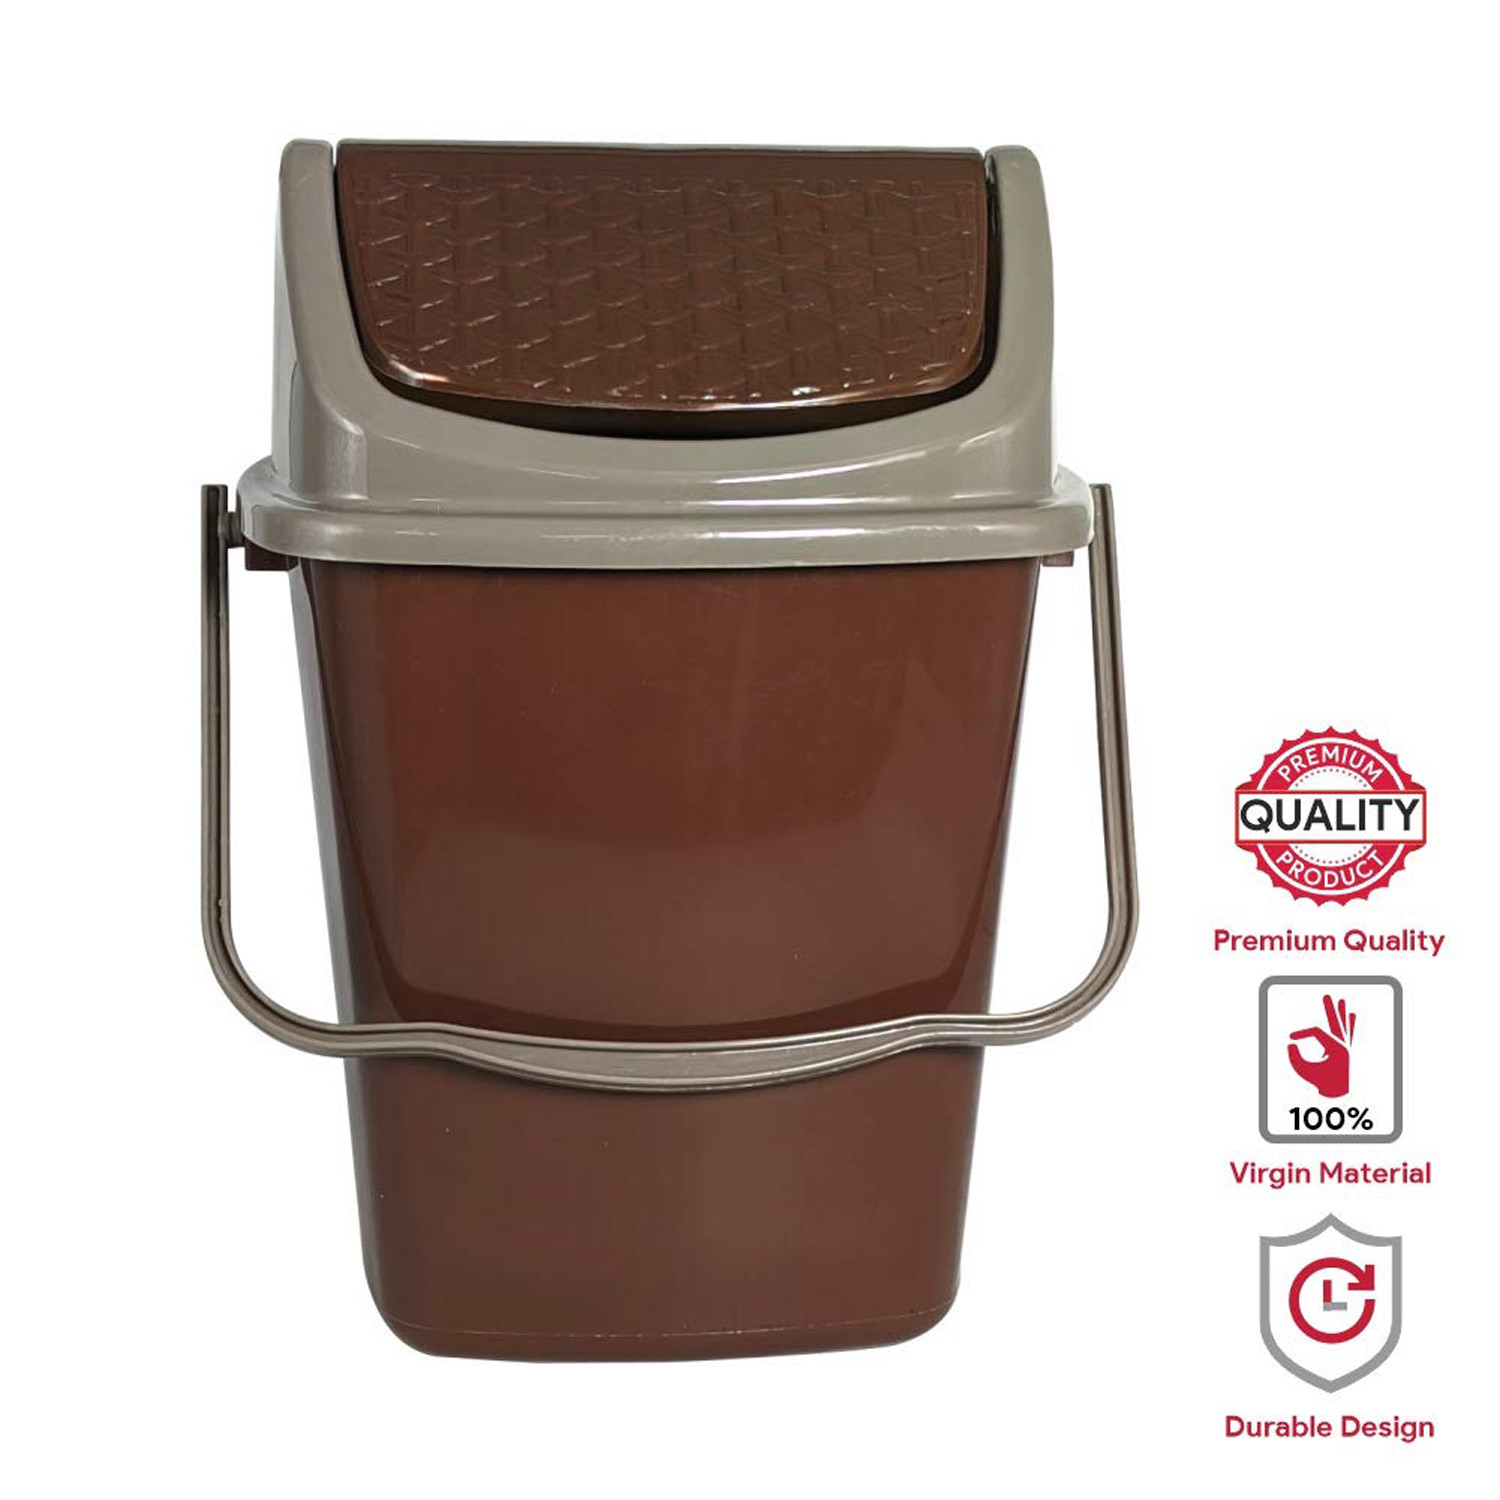 Kuber Industries Delight Plastic Swing  Garbage Waste Dustbin for Home, Office with Handle, 5 Liters (Brown & Light Brown)